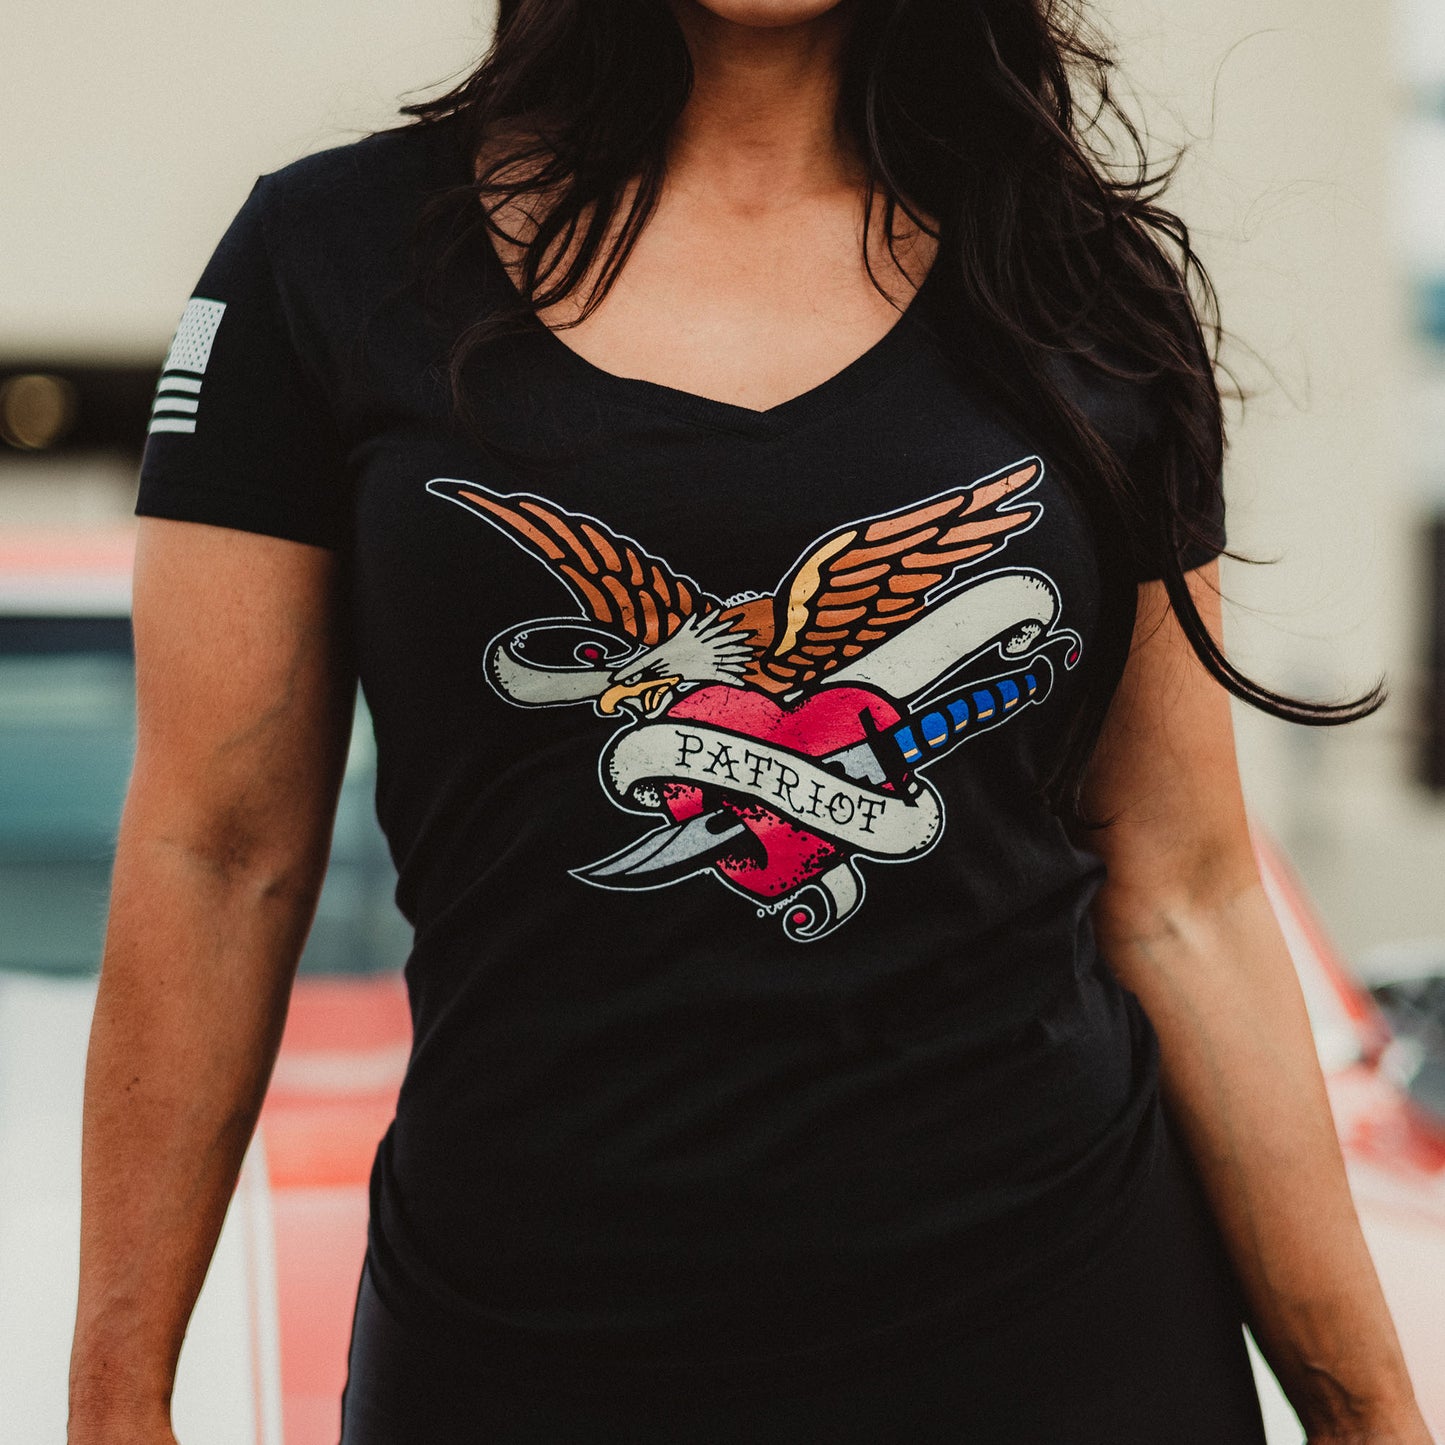 Patriotic Tops for Women - Patriot T-Shirt - WWII Inspired 